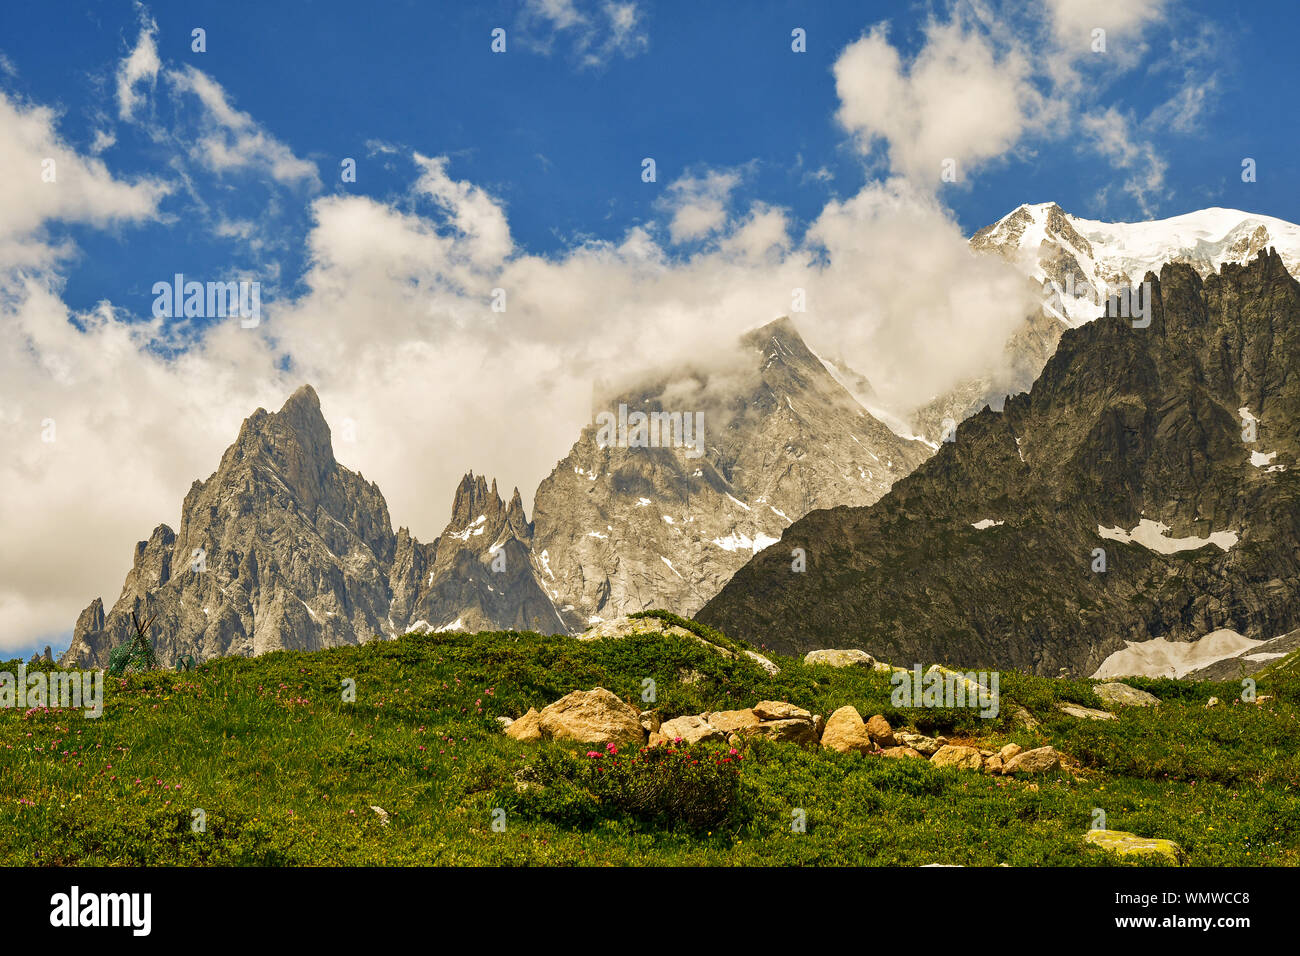 Mountain view with the Aiguille Noire de Peuterey peak (left, 3773 m) and the snowcapped Mont Blanc (right, 4810 m) in summer, Courmayeur, Alps, Italy Stock Photo